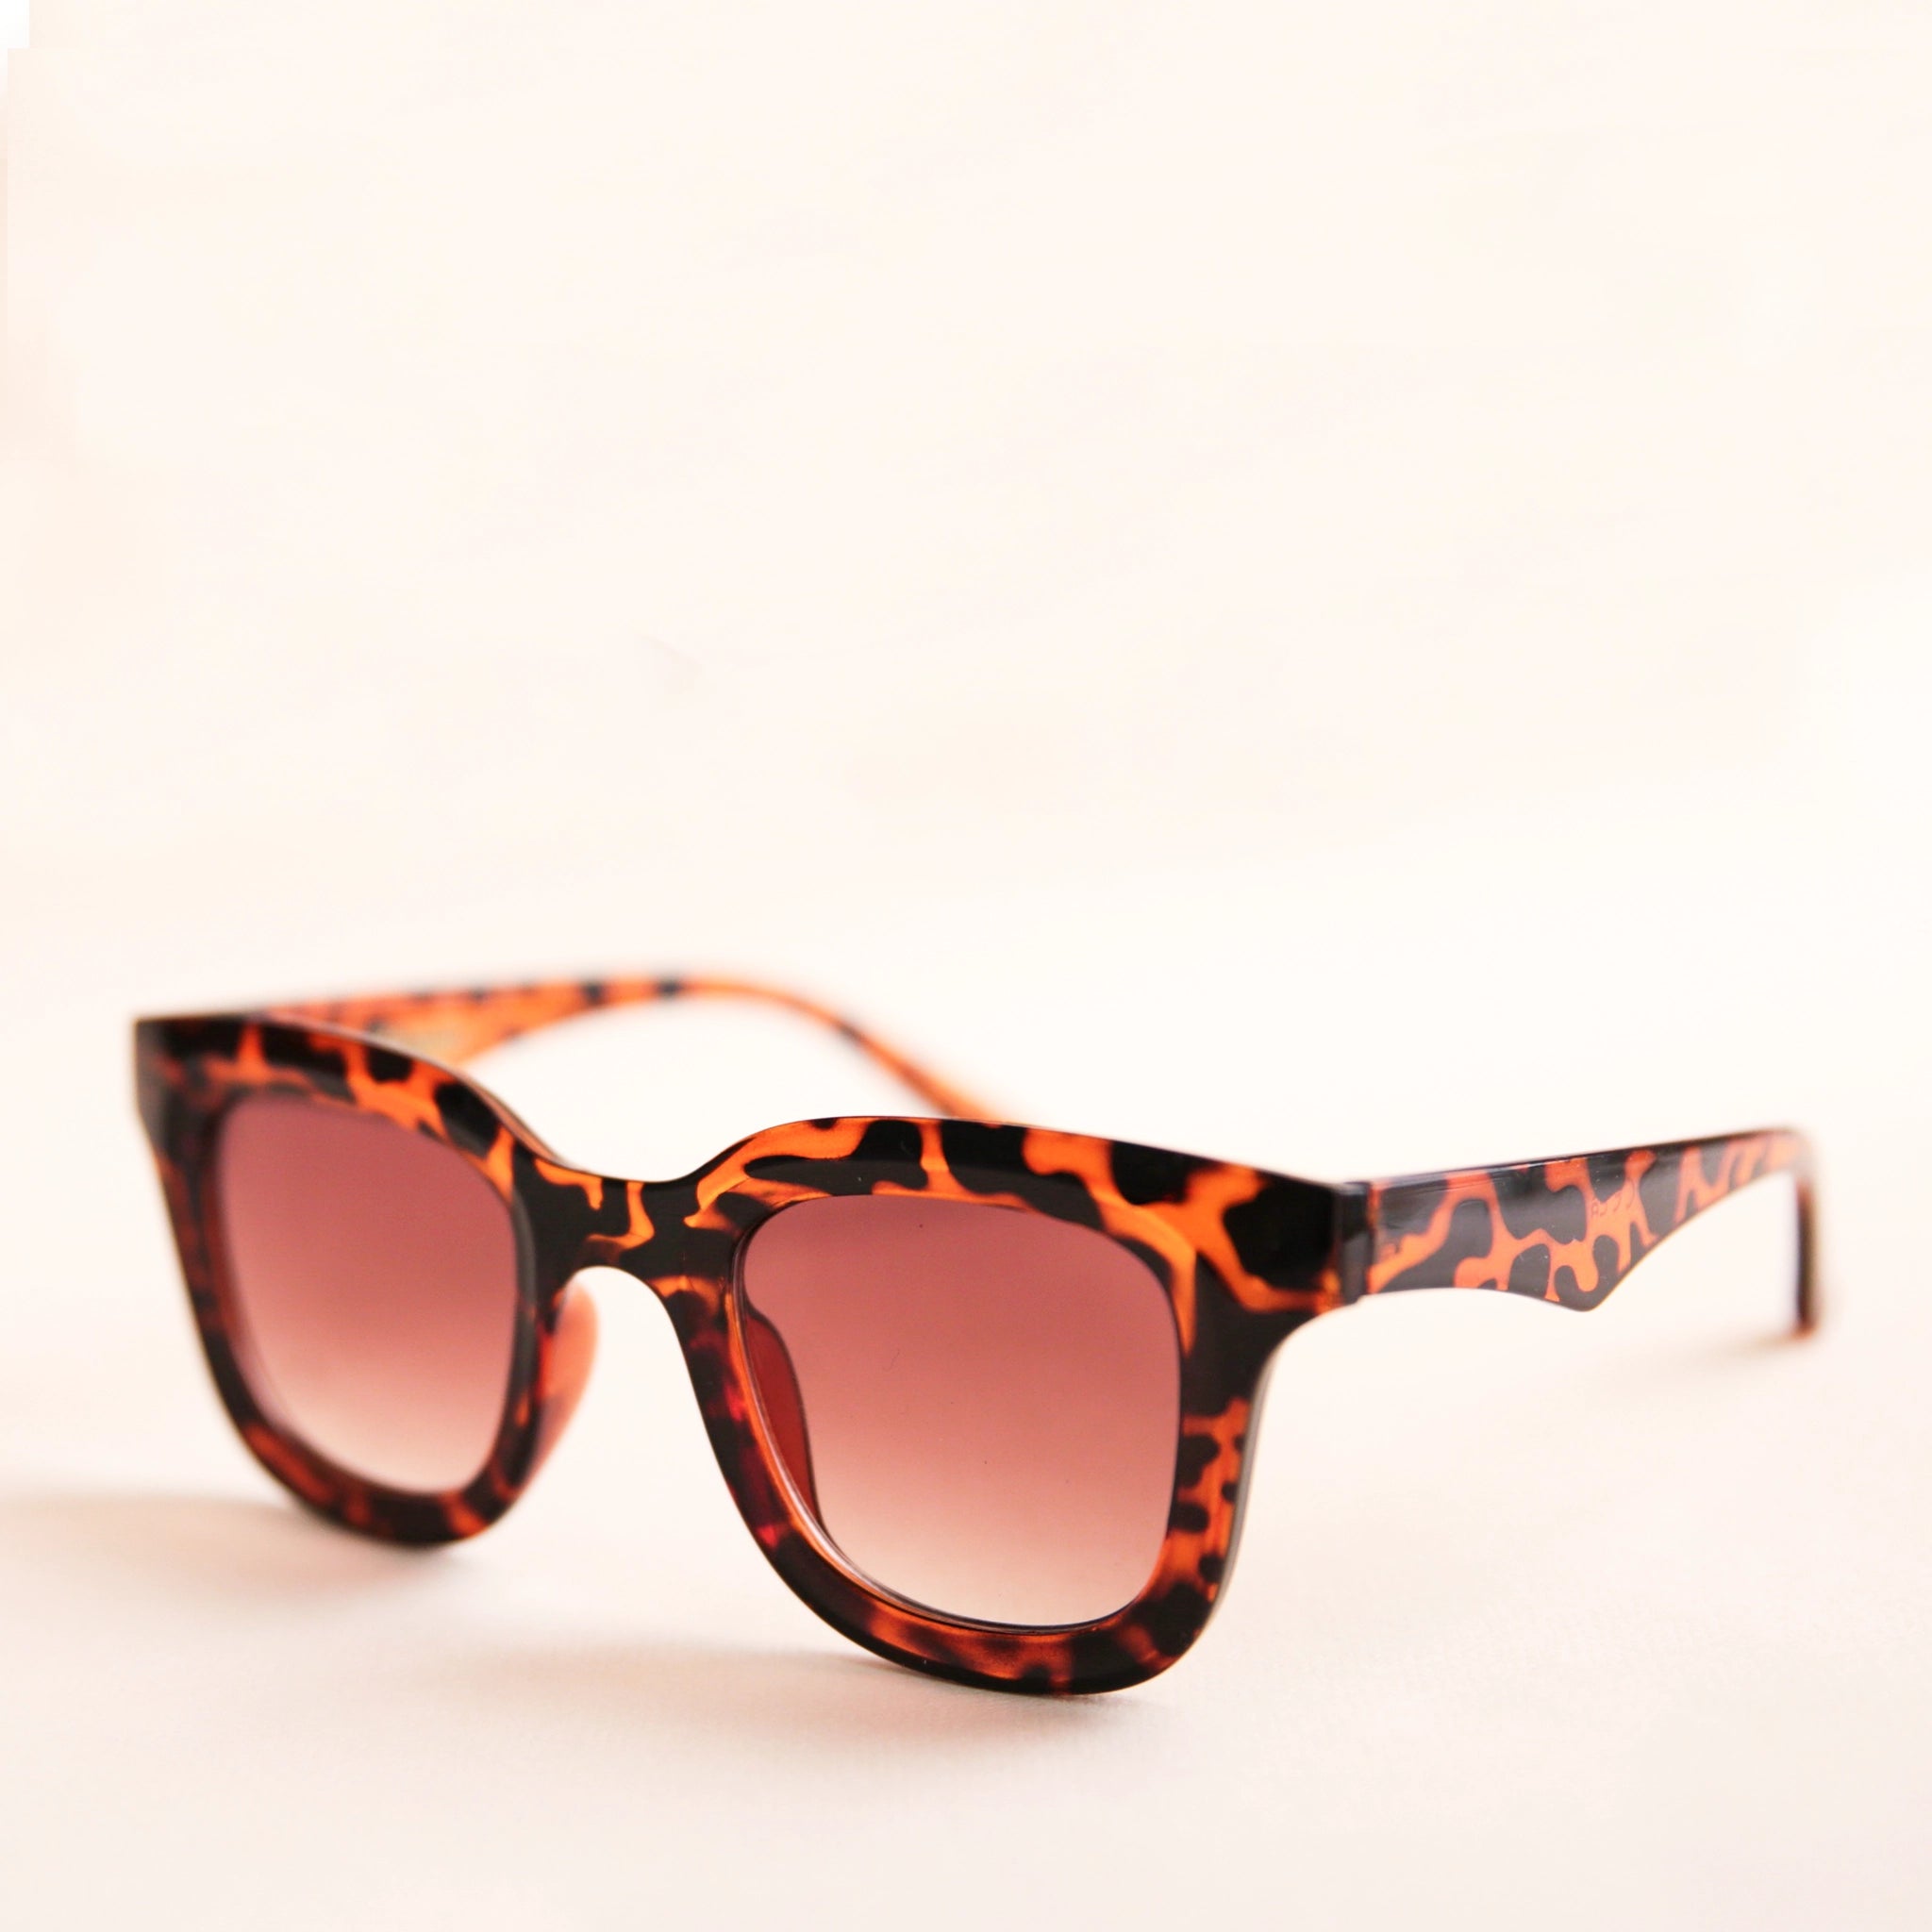 On a white background is a square pair of sunglasses with a brown and black tortoise pattern and a light brown lens. 